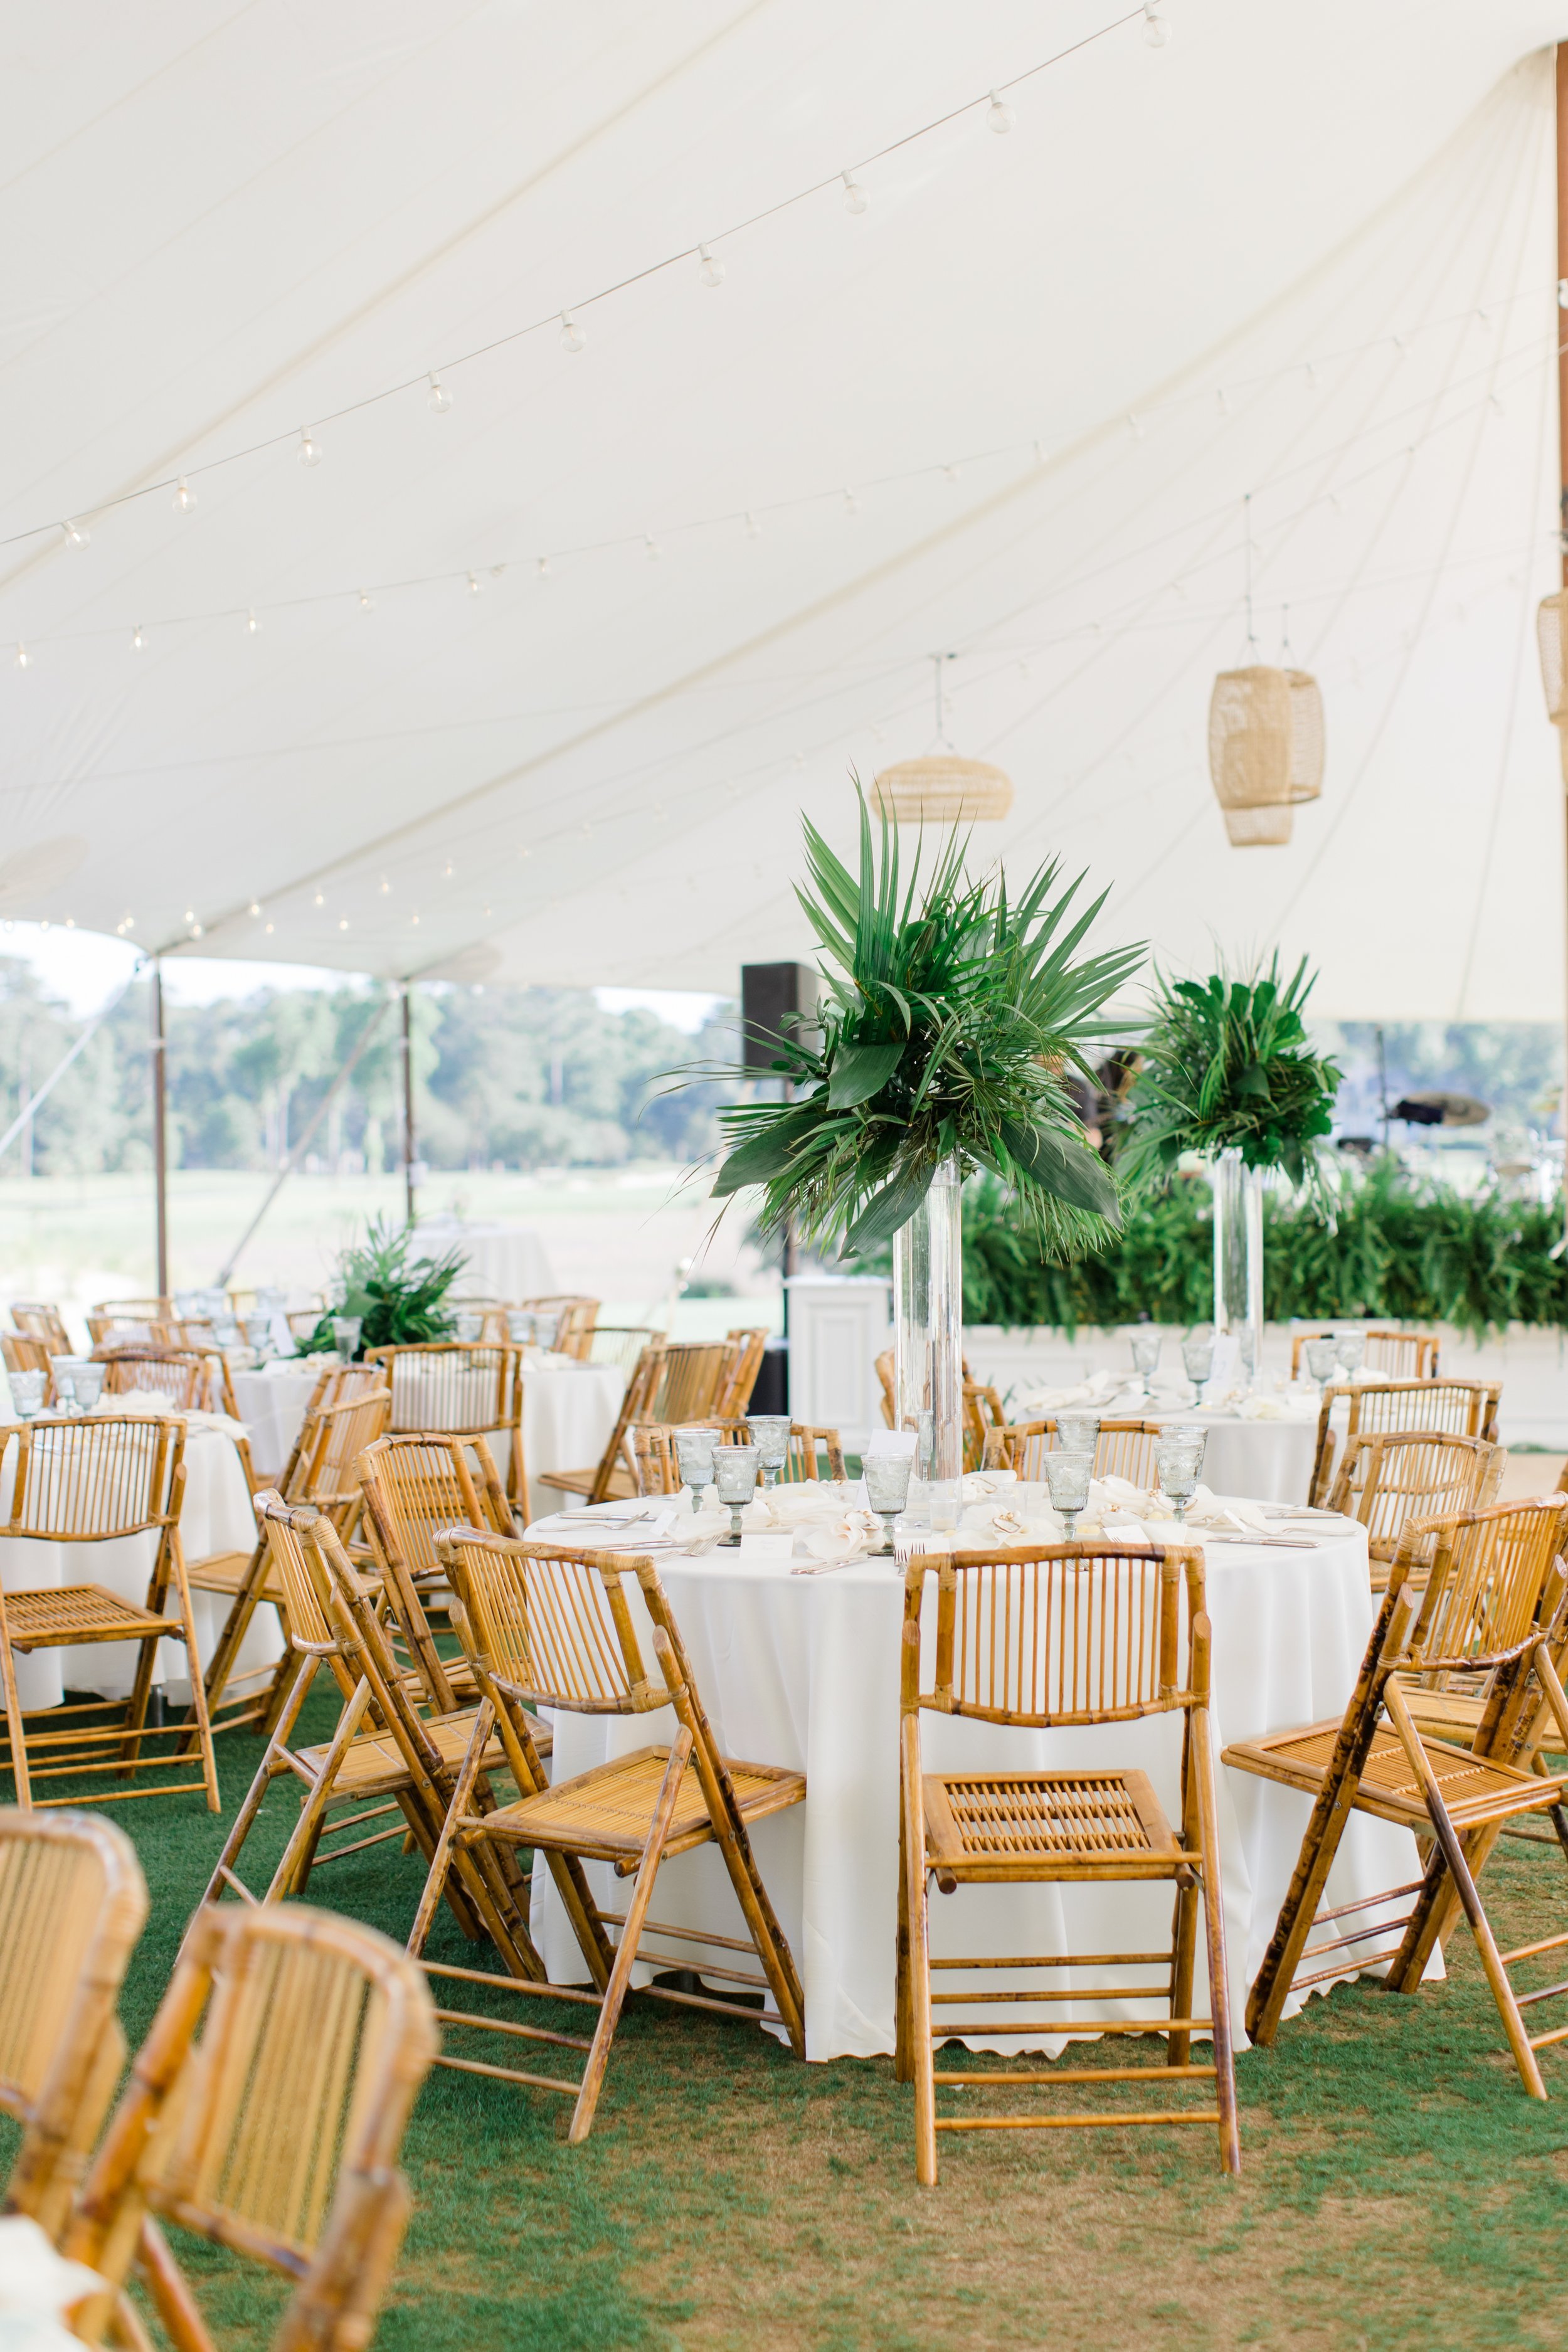 a-southern-chic-south-carolina-wedding-at-the-colleton-river-club-featuring-sophisticated-modern-florals-designed-by-savannah-florist-ivory-and-beau-38.jpg